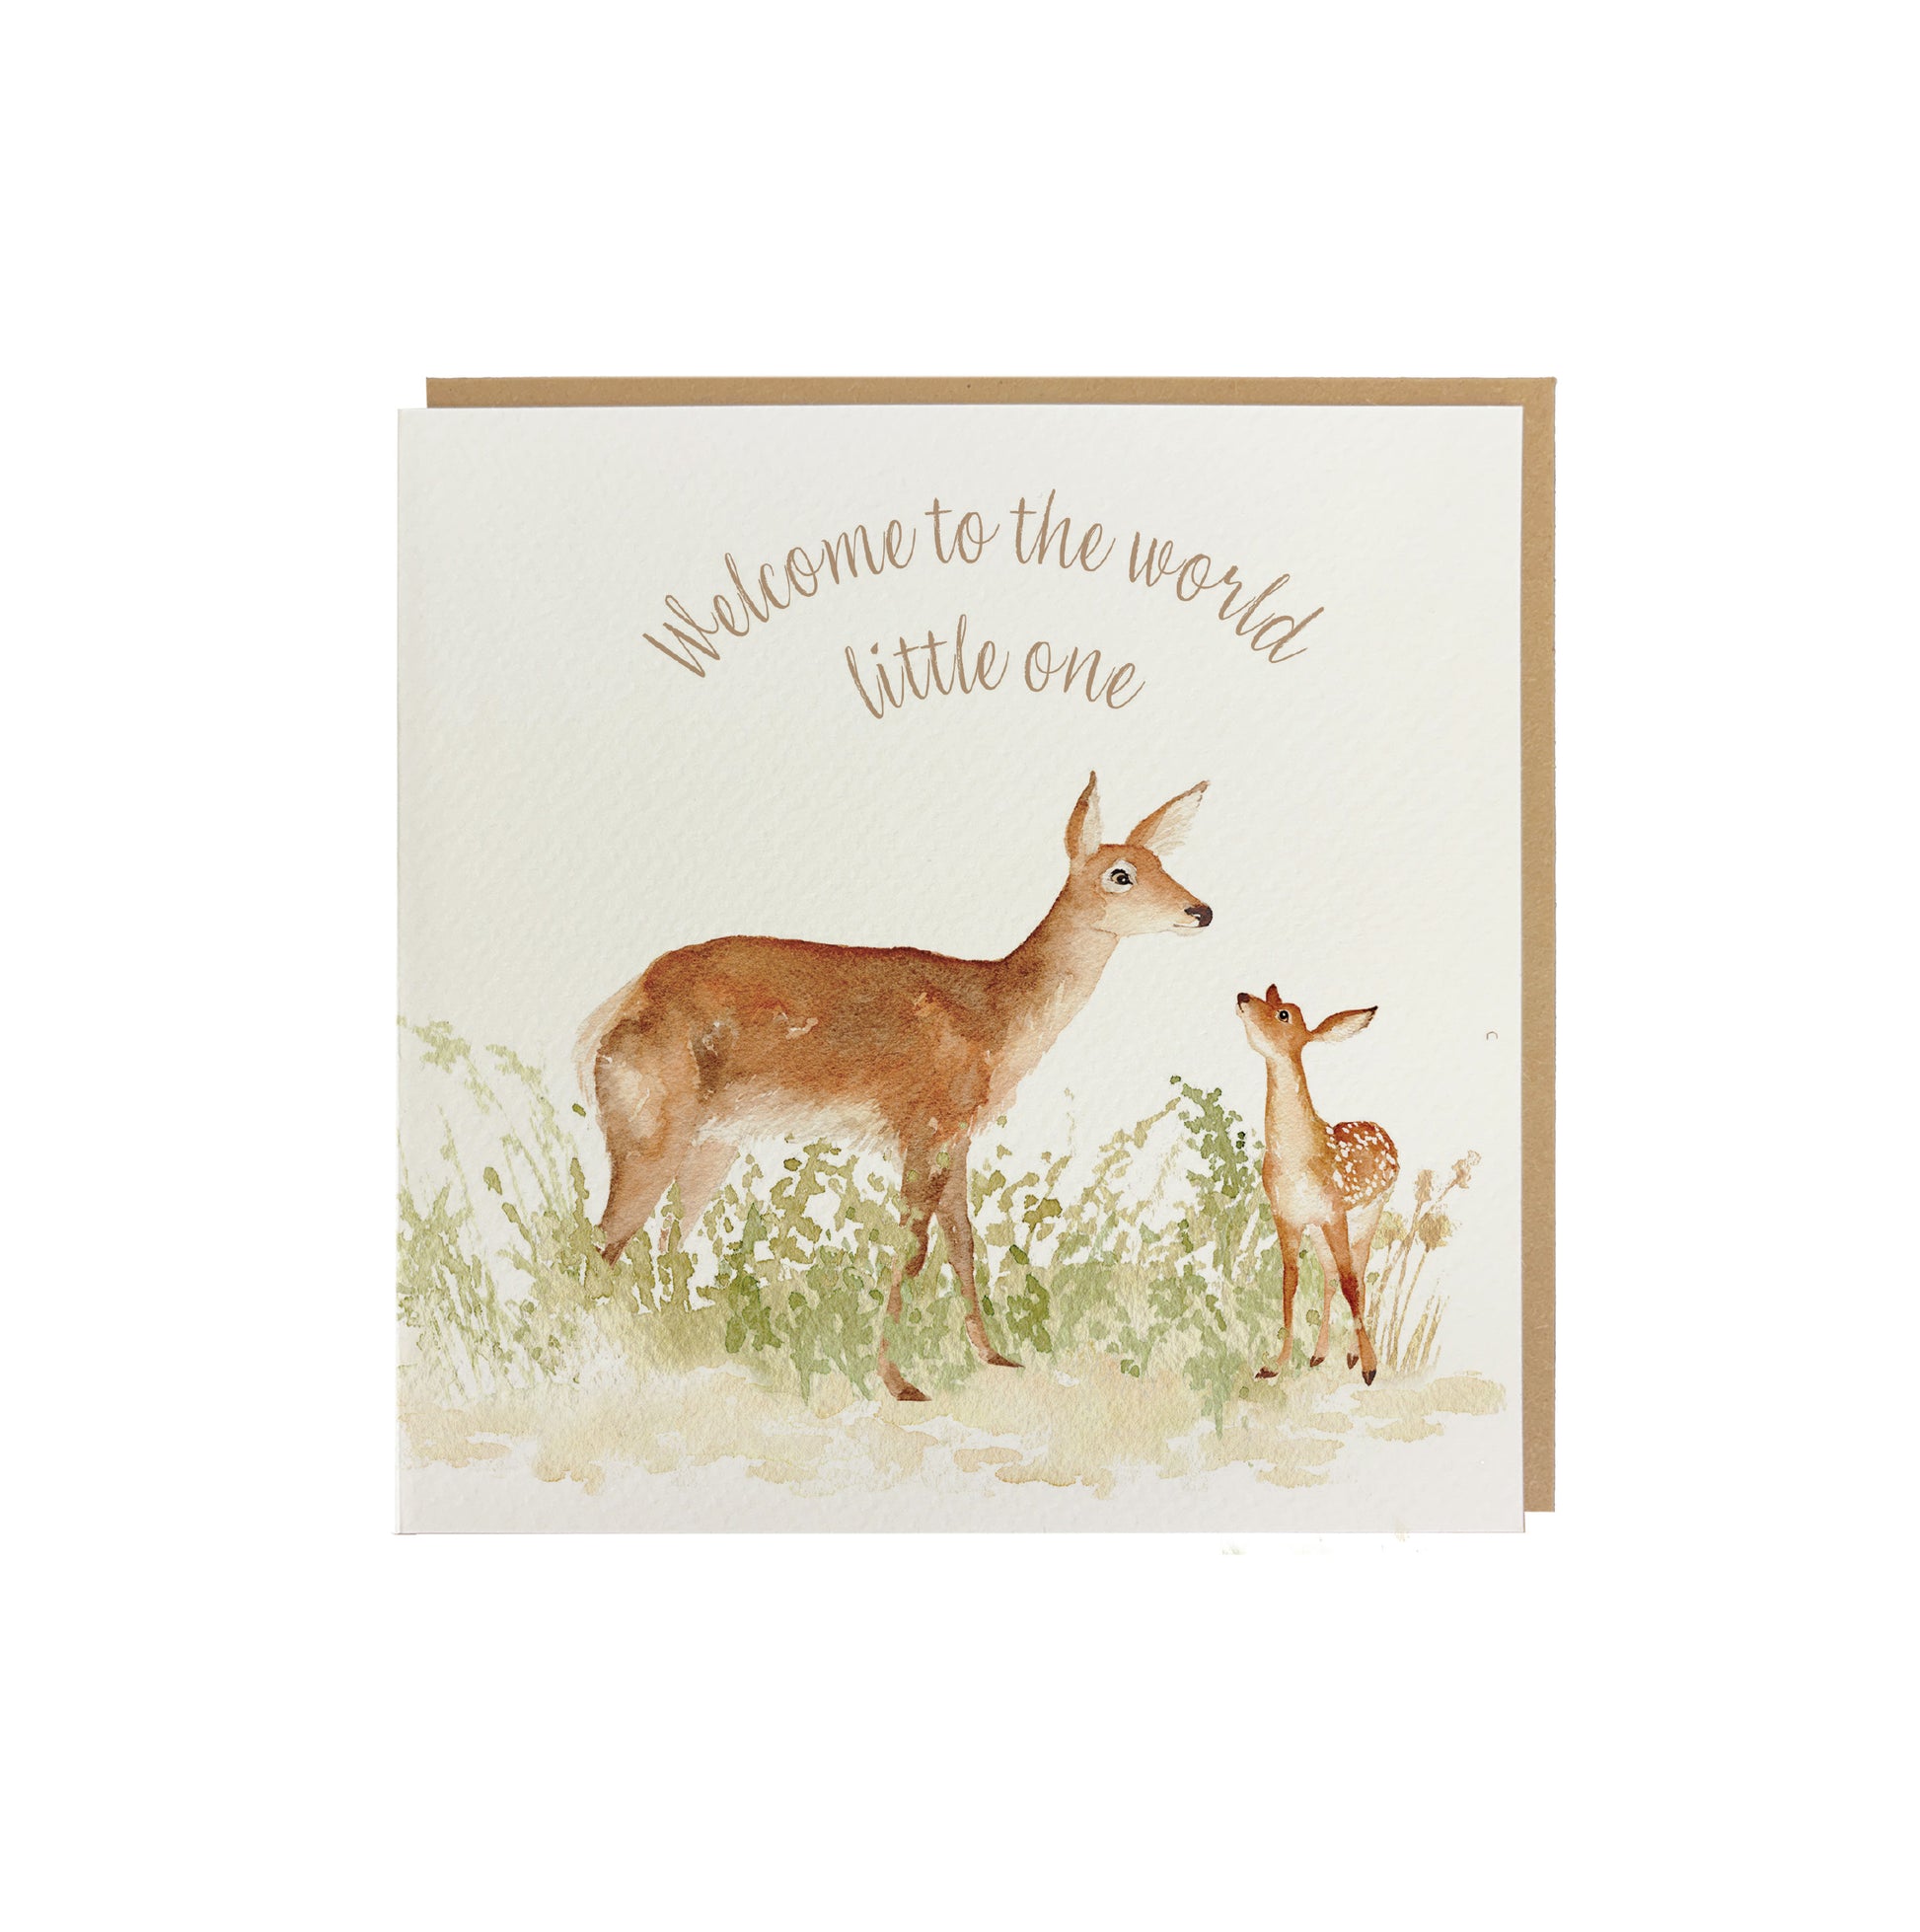 A greetings card reading Welcome to the World Little One in brown text above a red deer doe and baby fawn in a watercolour style. The card has a recyclable brown kraft envelope behind it.